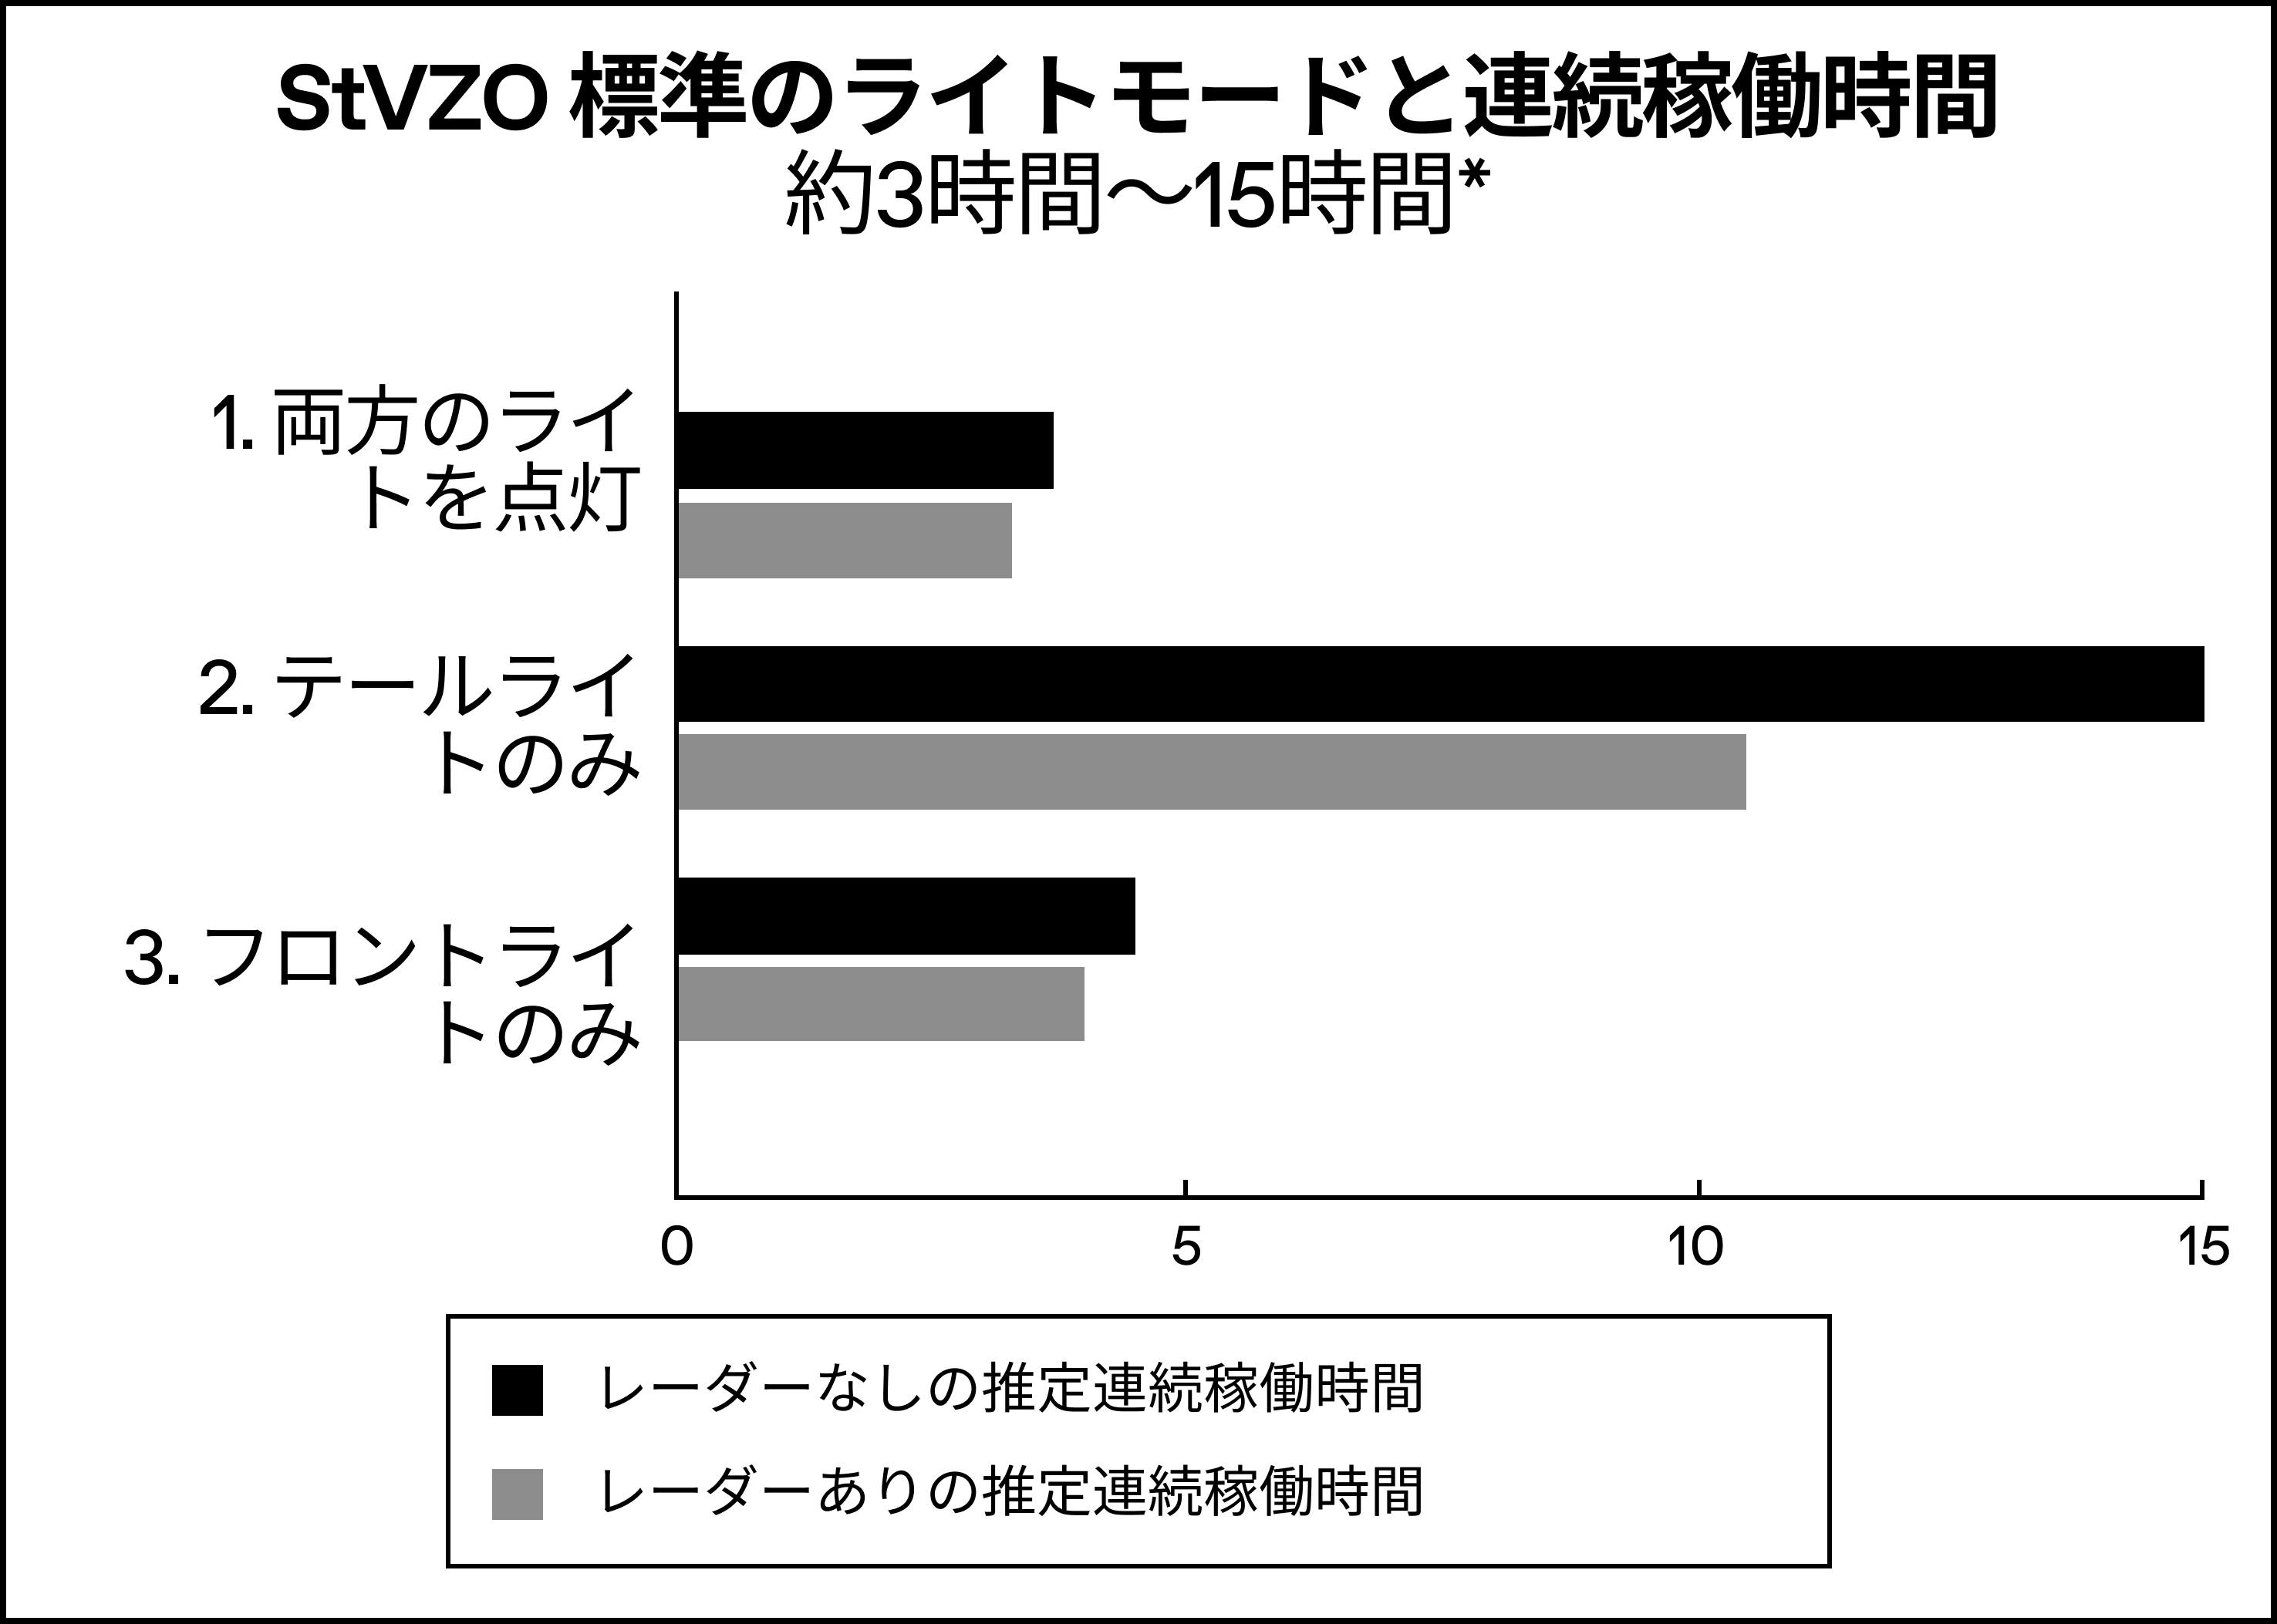 StVZO_Modes___Runtimes_-_Japanese.png